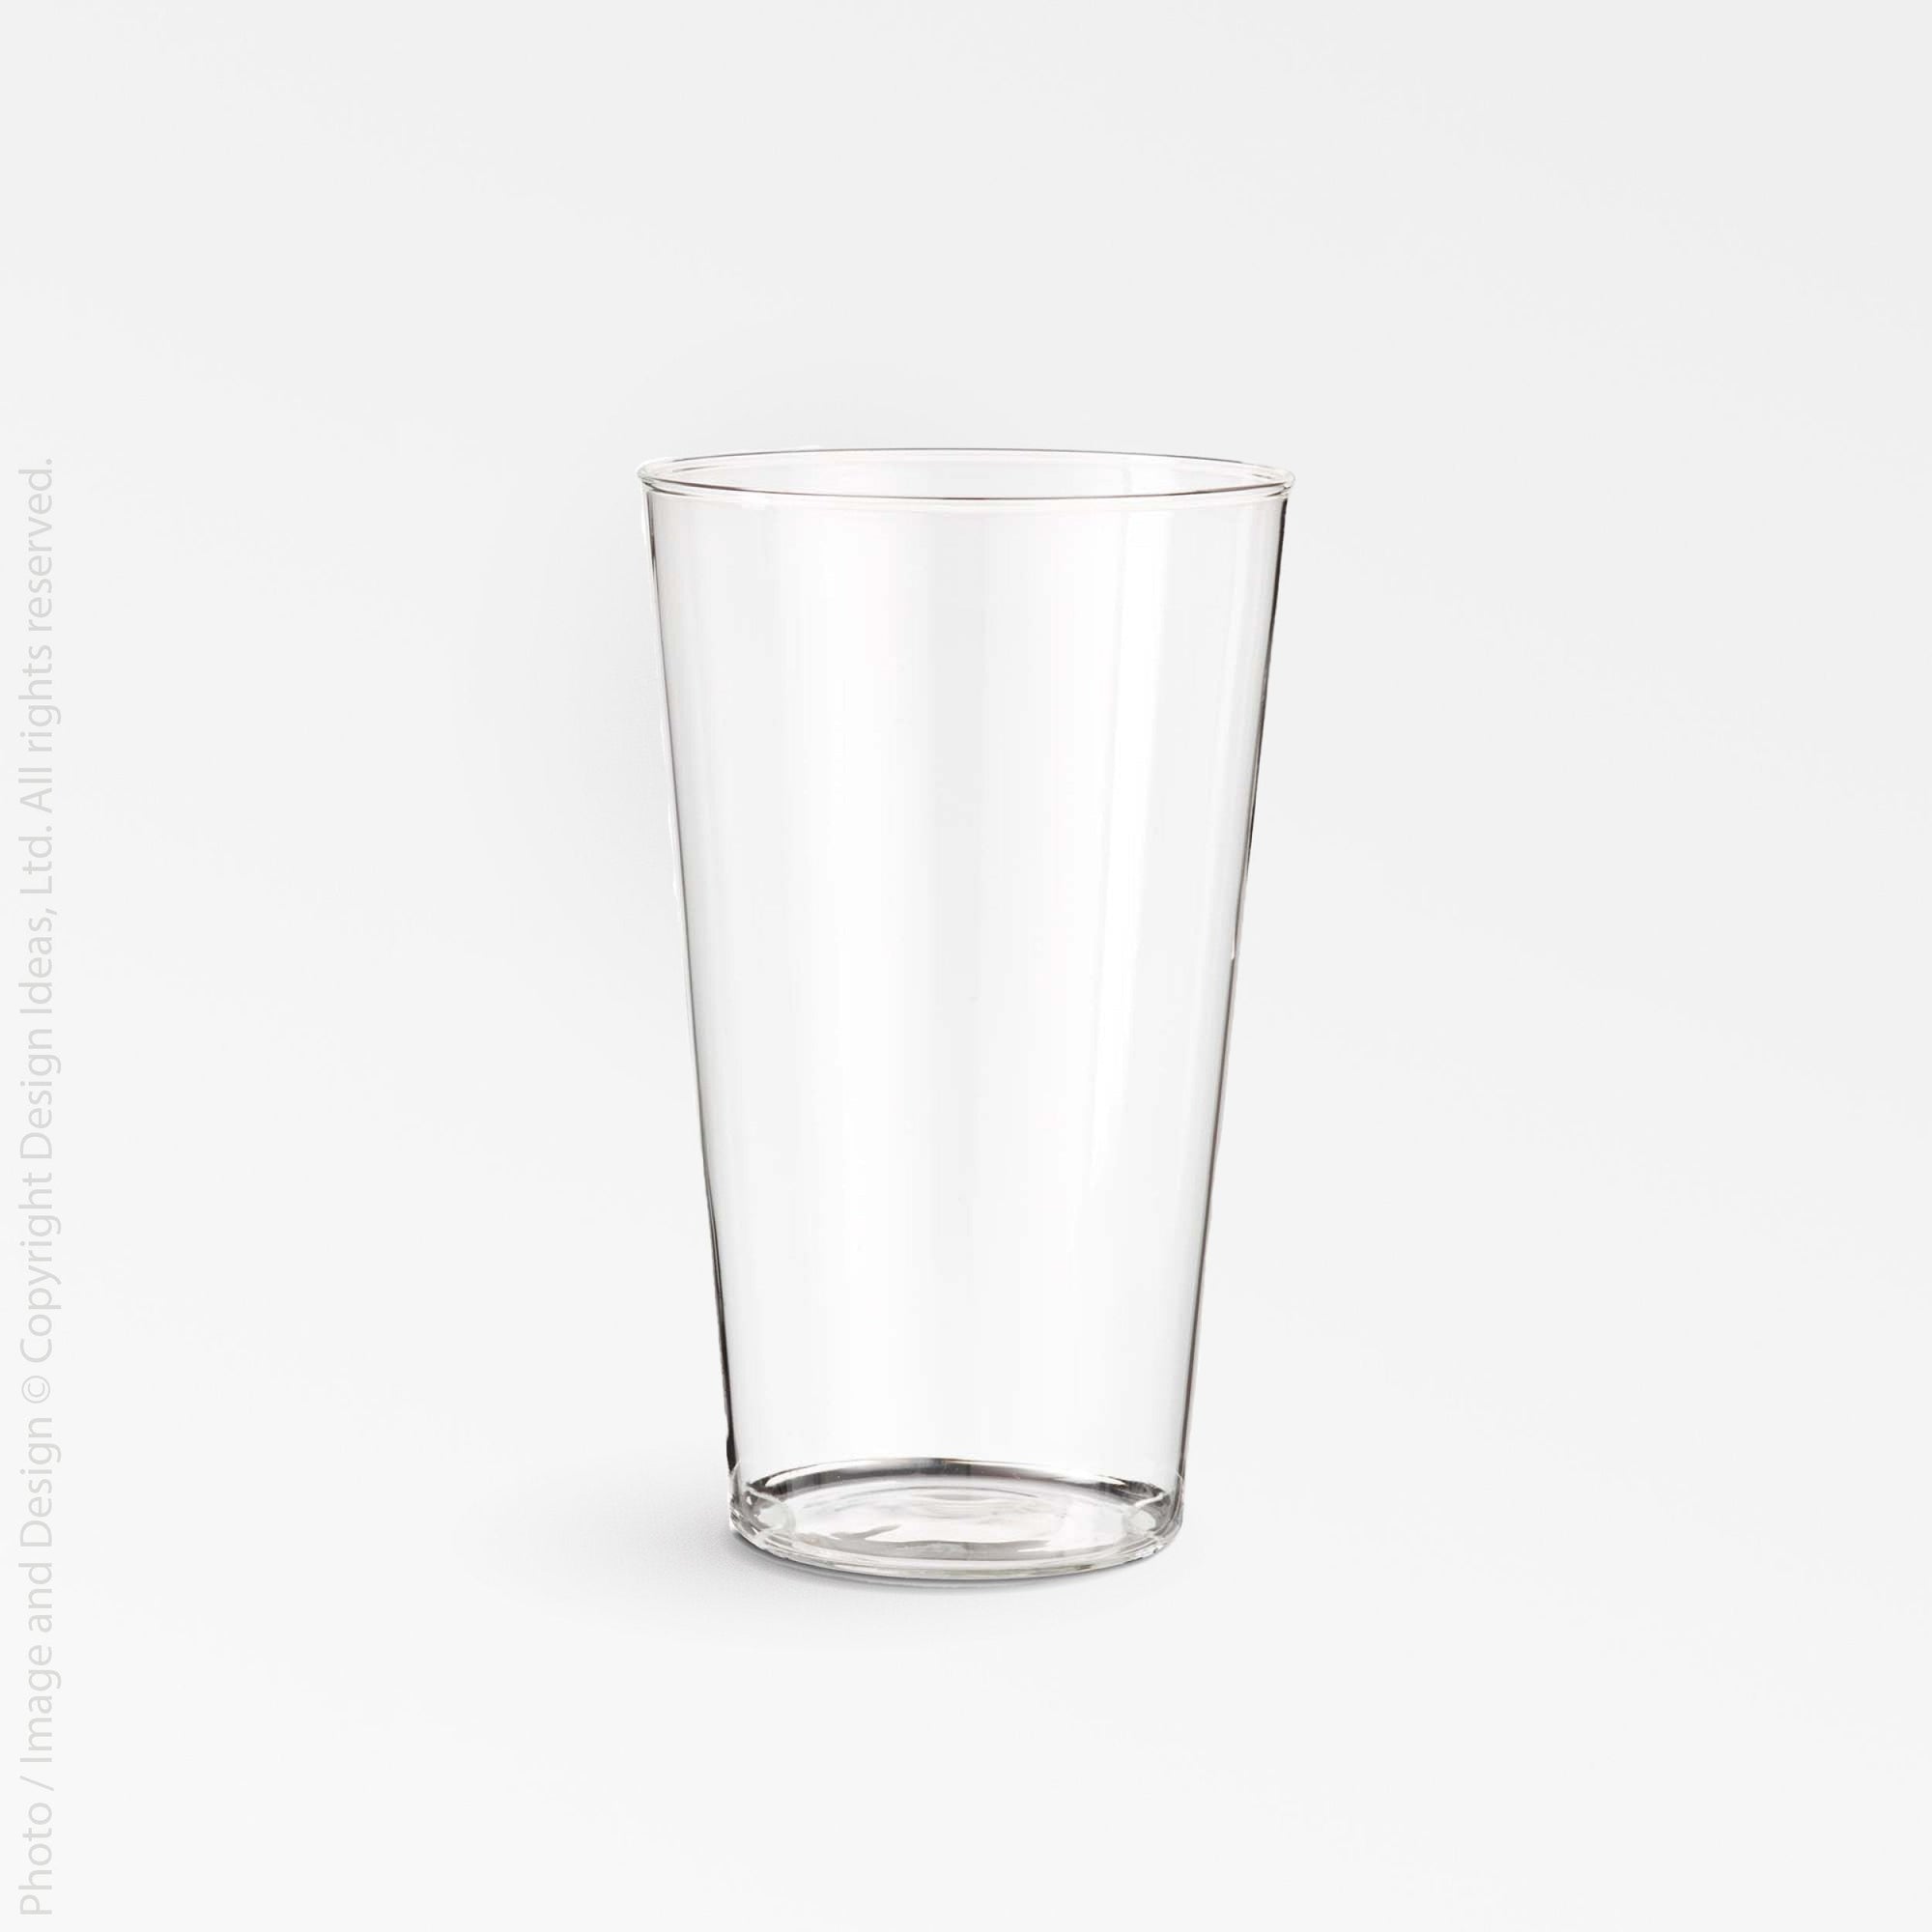 Lexington Sinfle Wall Pint Glass - white color | Image 1 | From the Lexington Collection | Exquisitely assembled with natural glass for long lasting use | Available in clear color | texxture home